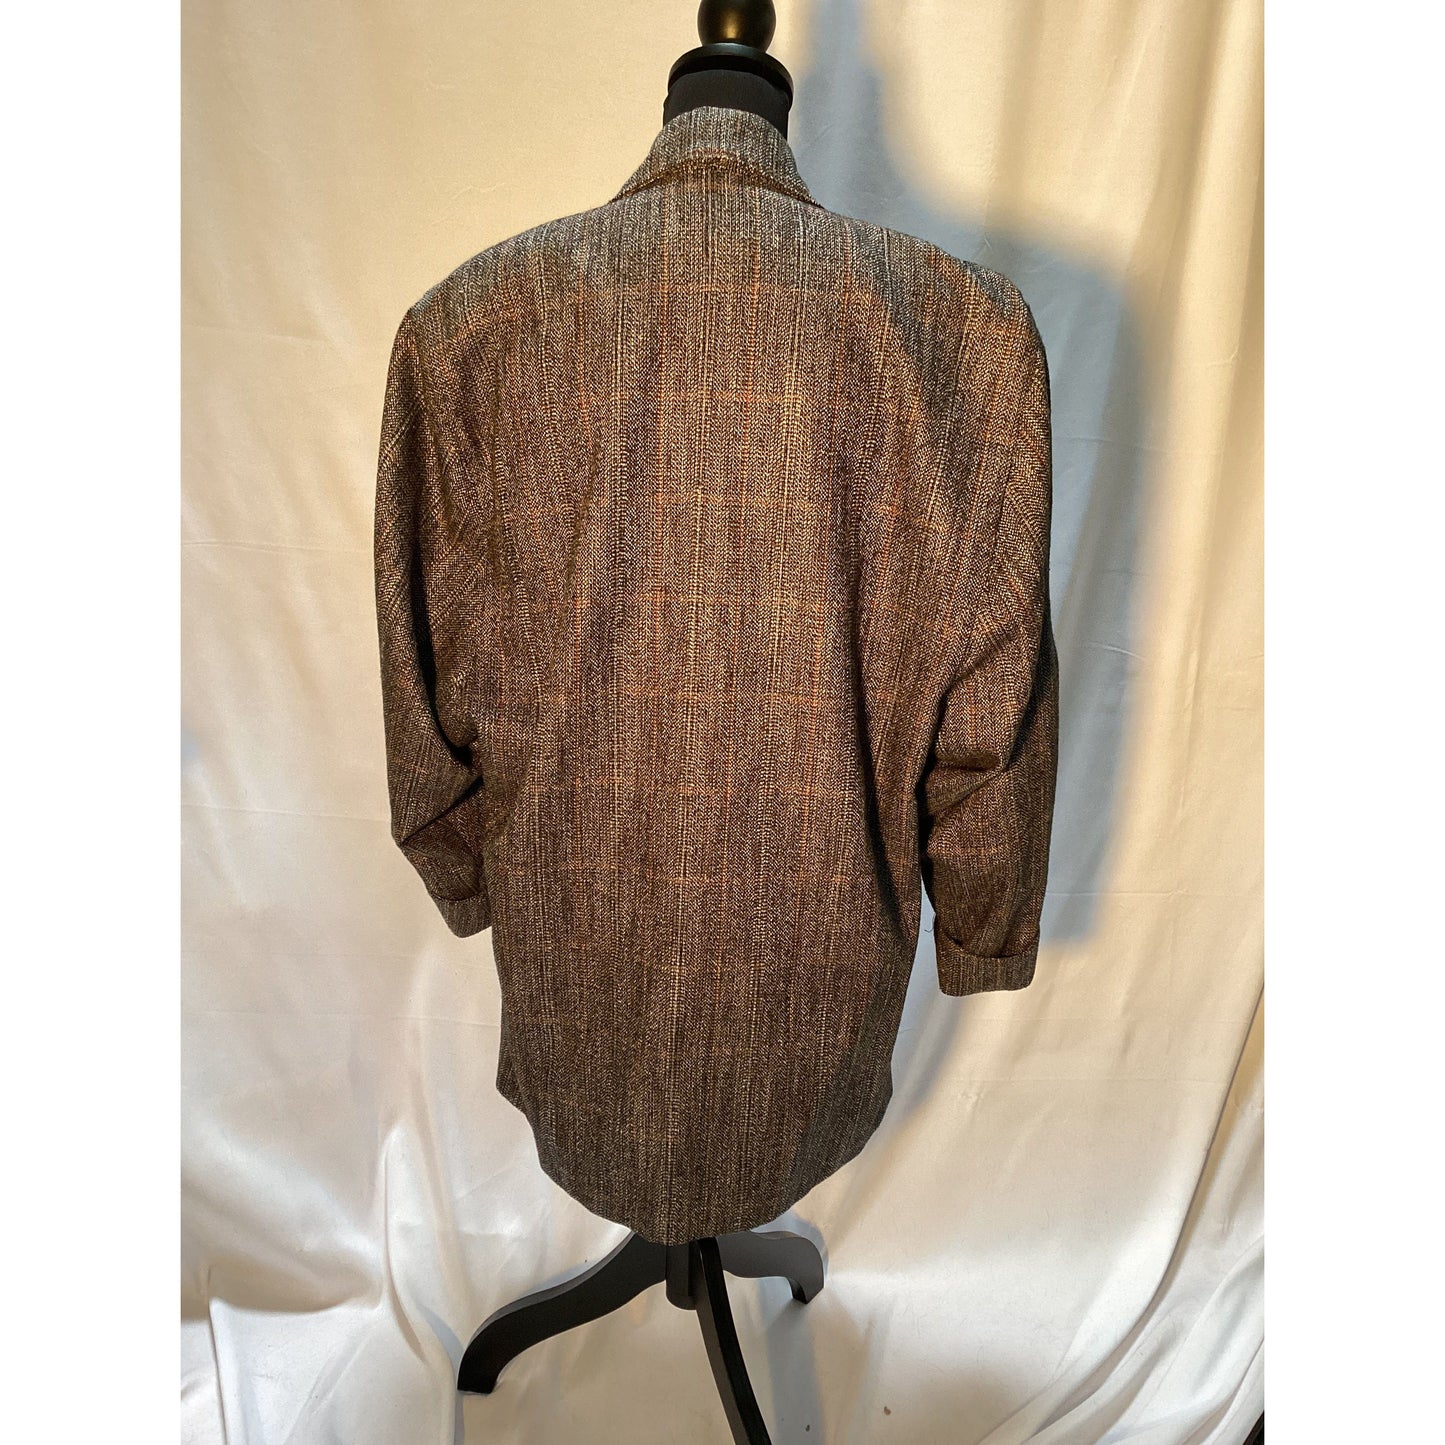 Oversized wool blazer, brown with stripes with pockets size 14/15